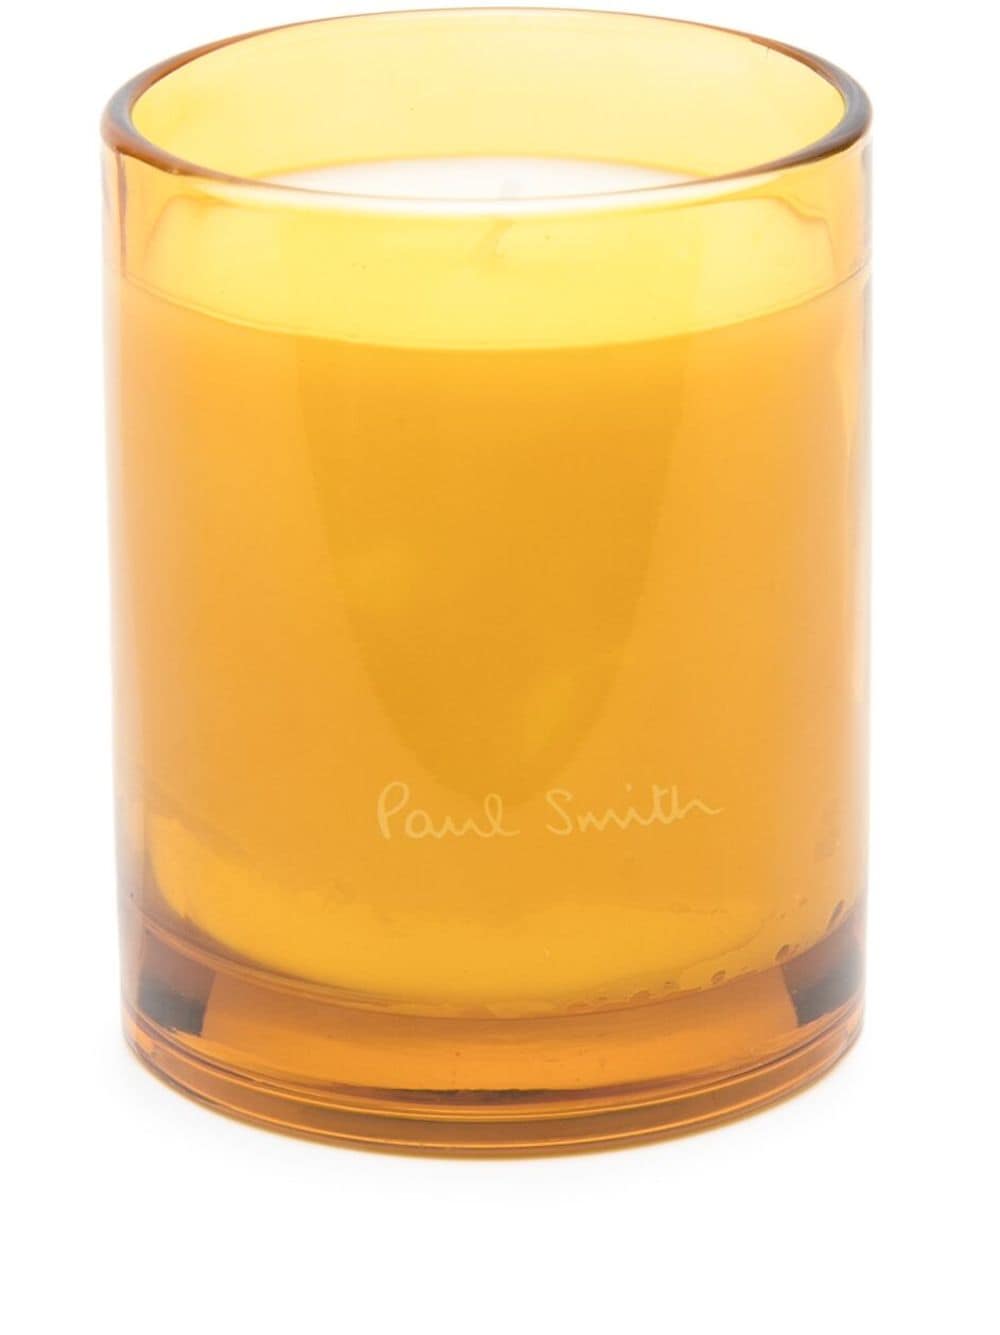 Paul Smith Daydreamer scented candle (240g) - Yellow von Paul Smith